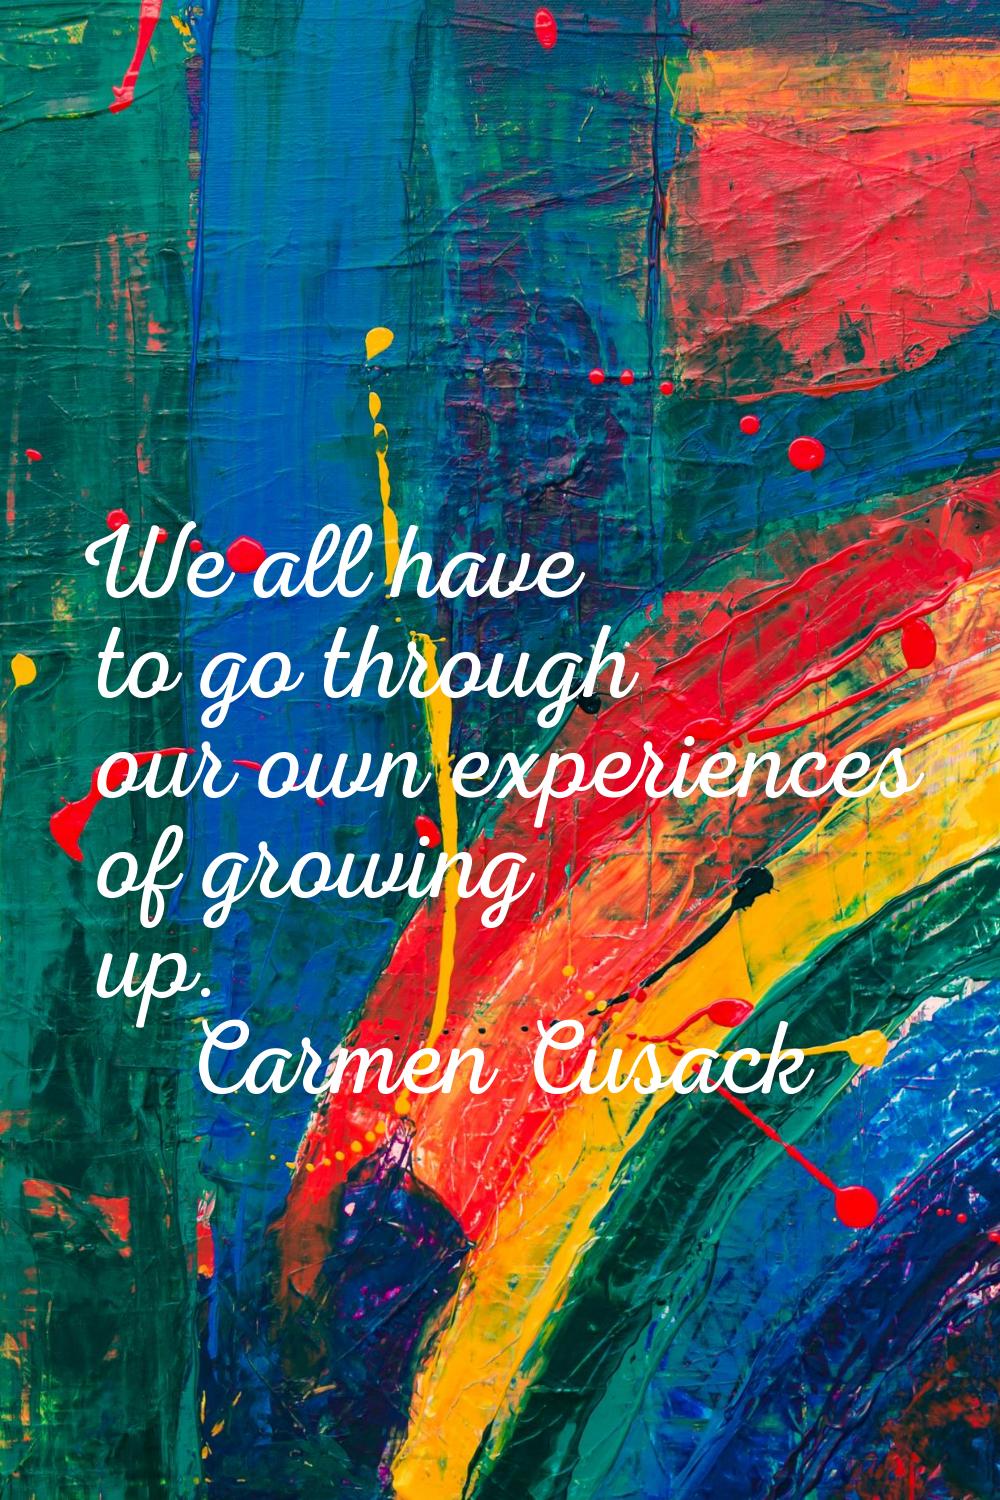 We all have to go through our own experiences of growing up.